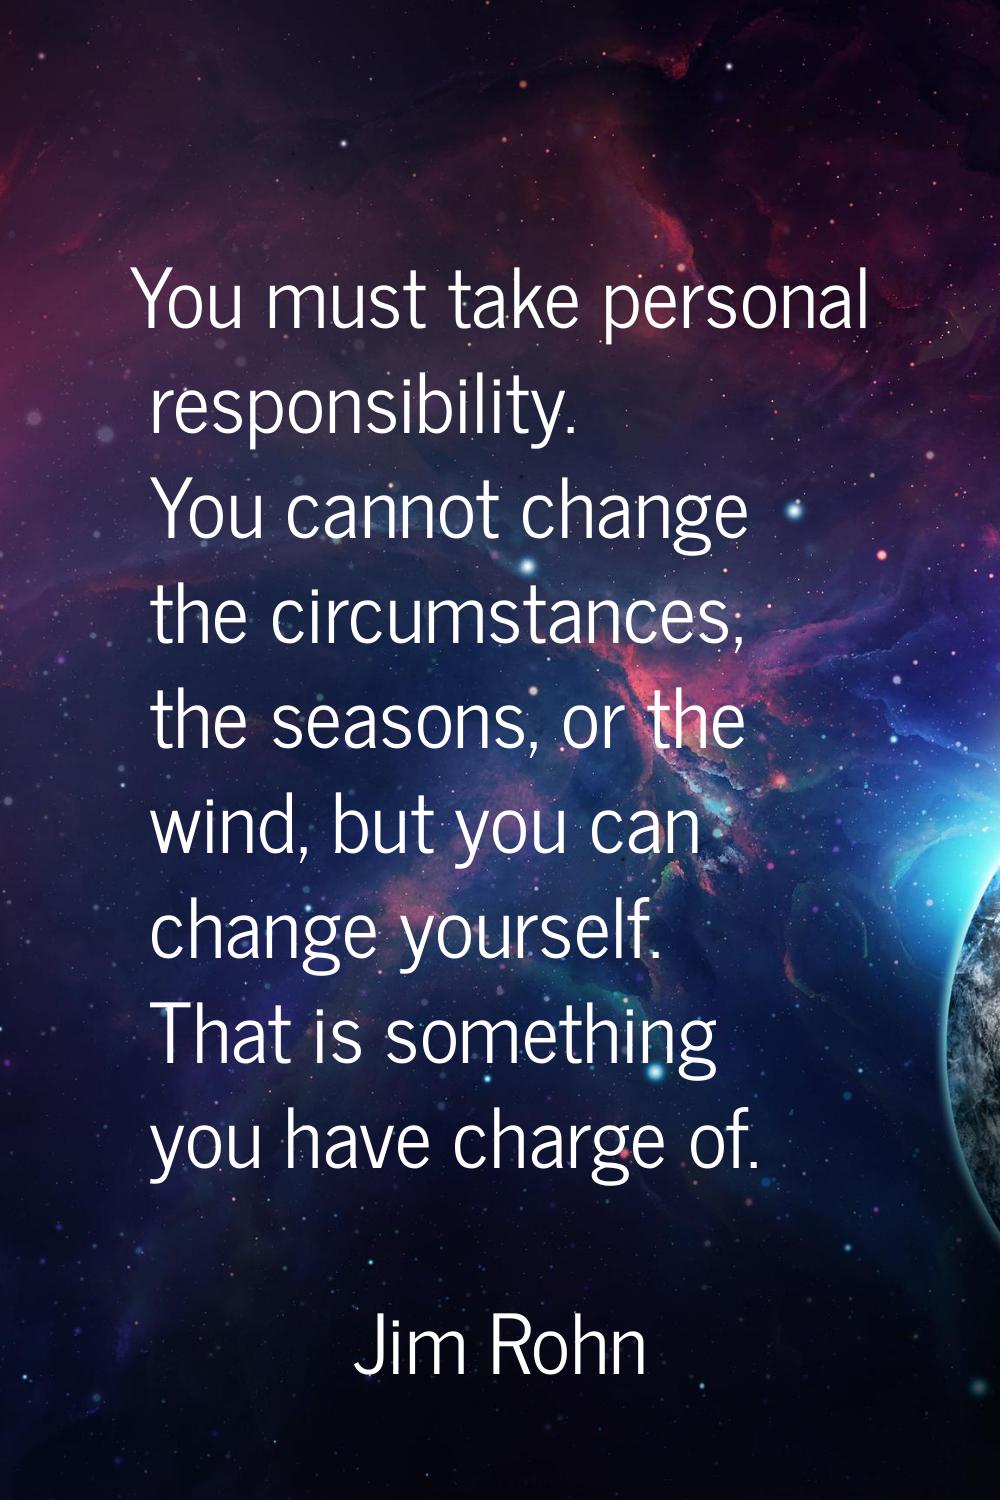 You must take personal responsibility. You cannot change the circumstances, the seasons, or the win